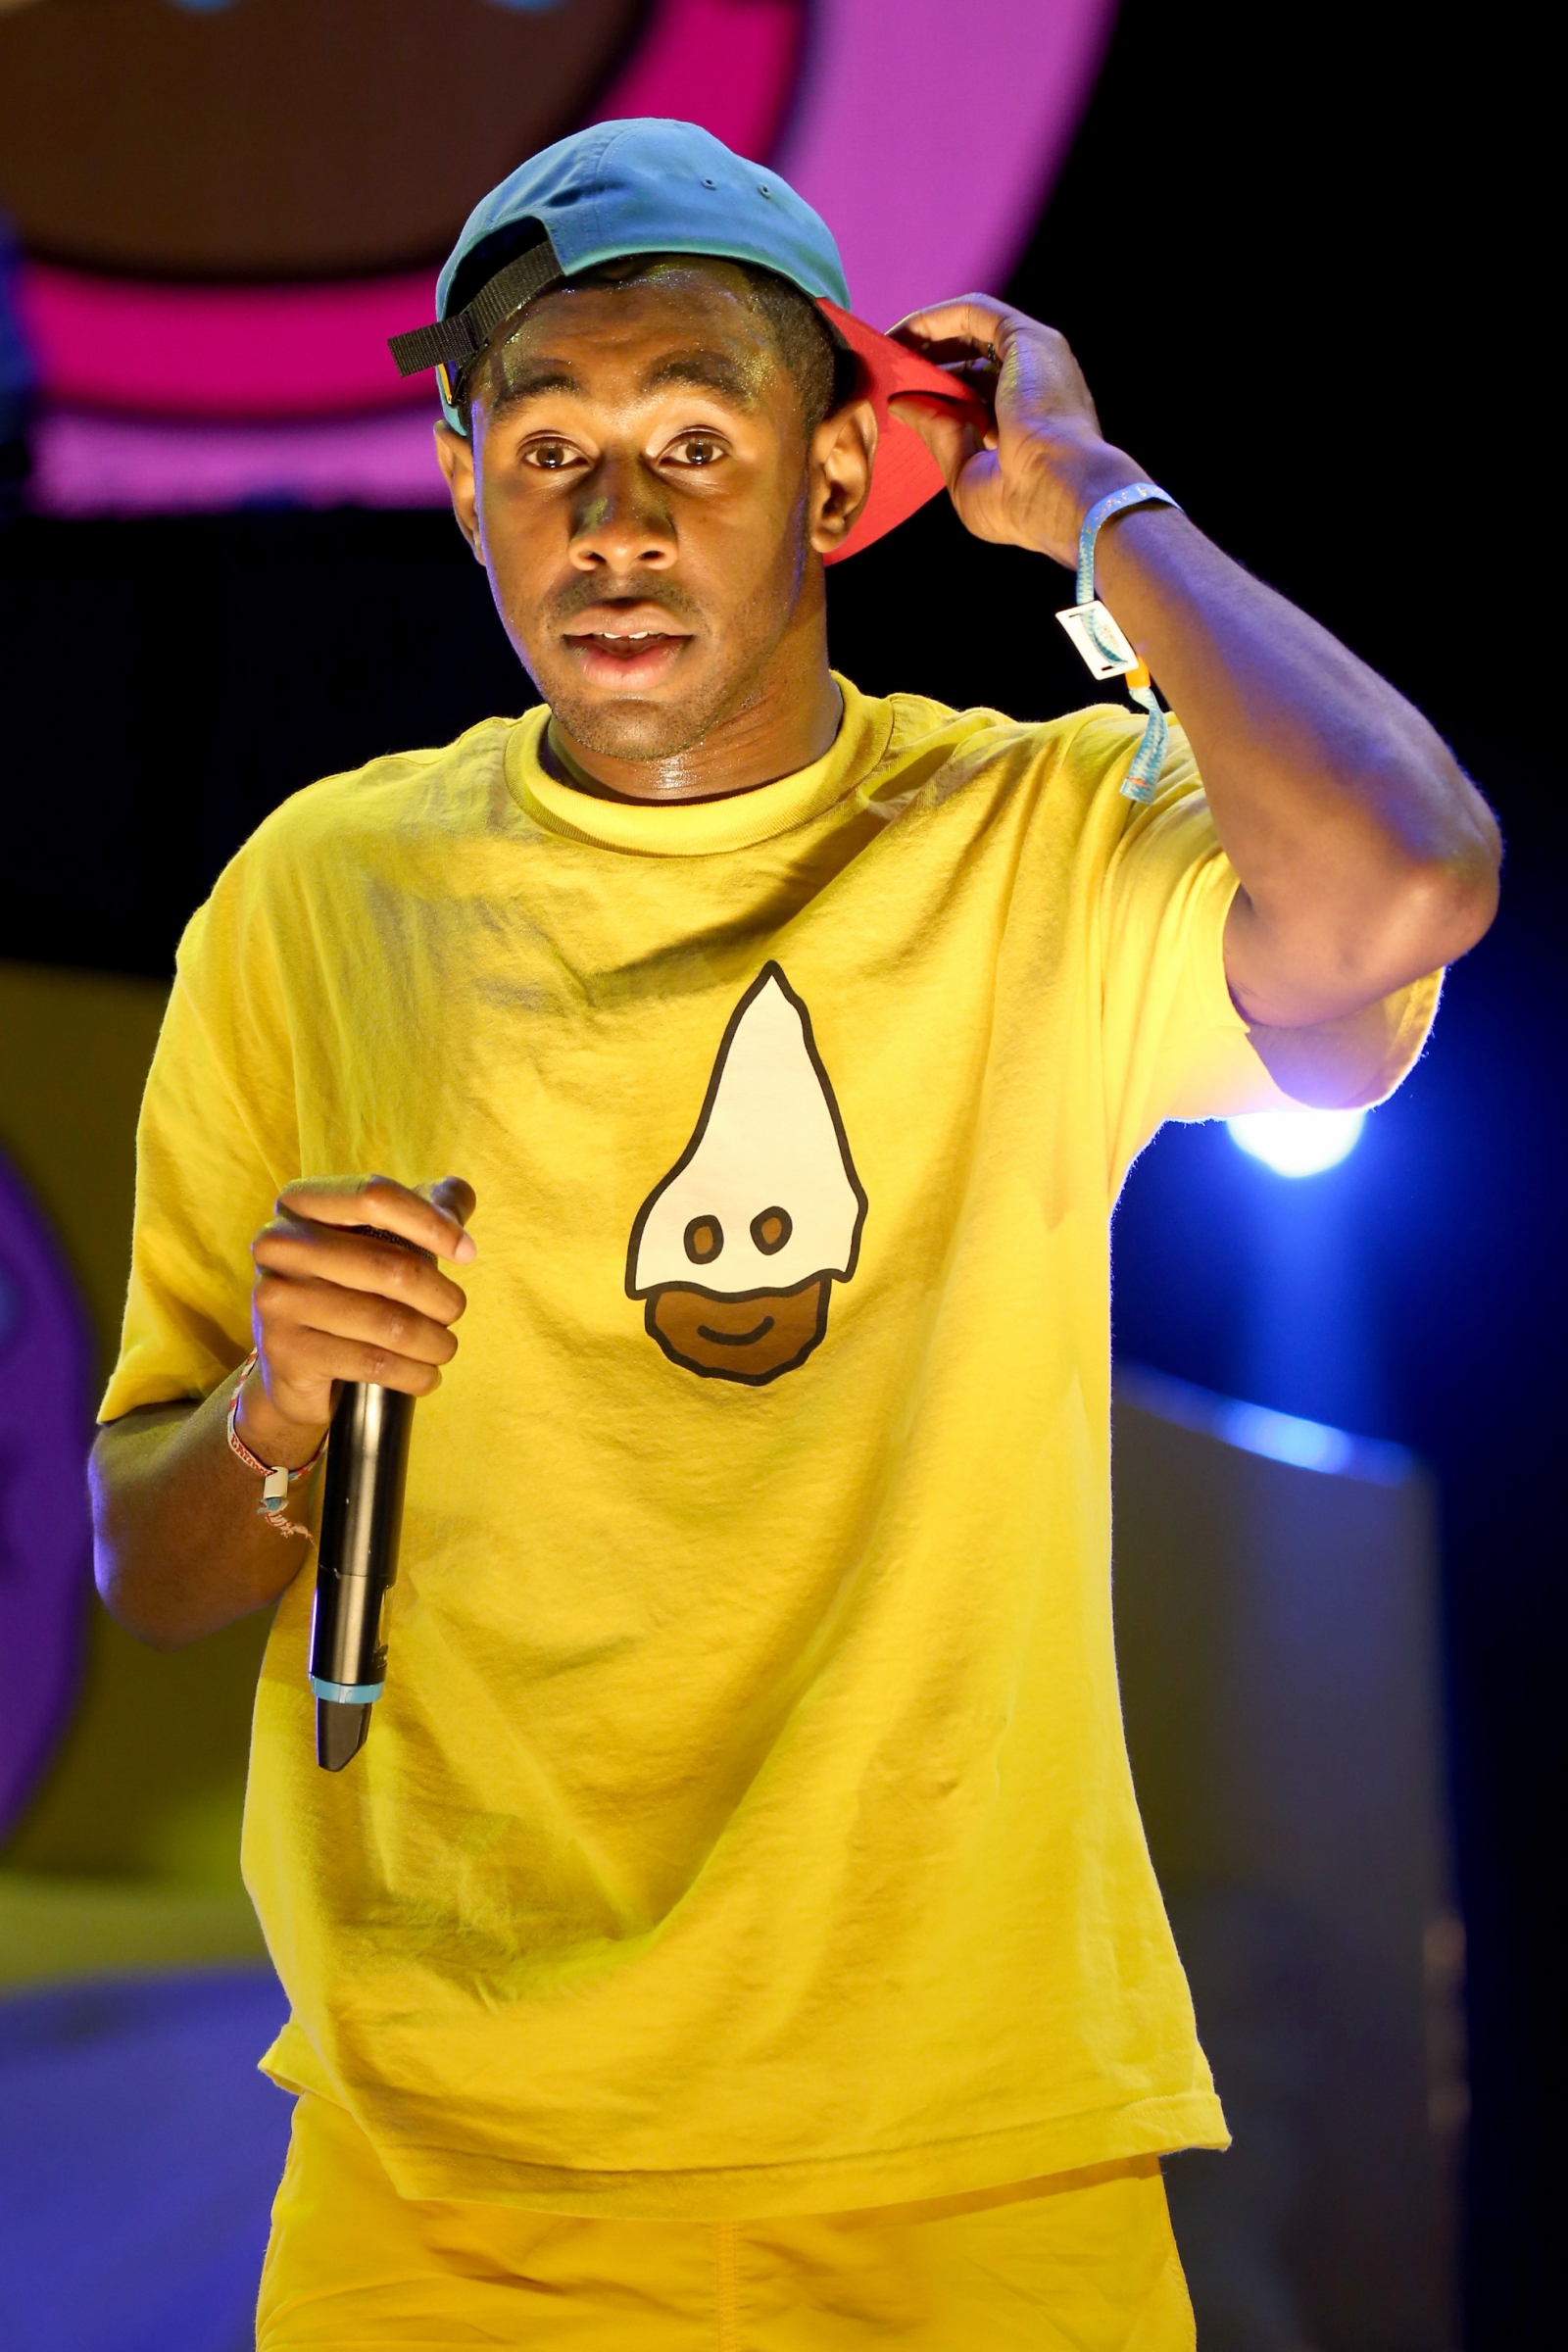 Tyler, The Creator banned from UK due to 'homophobic lyrics' on previous albums